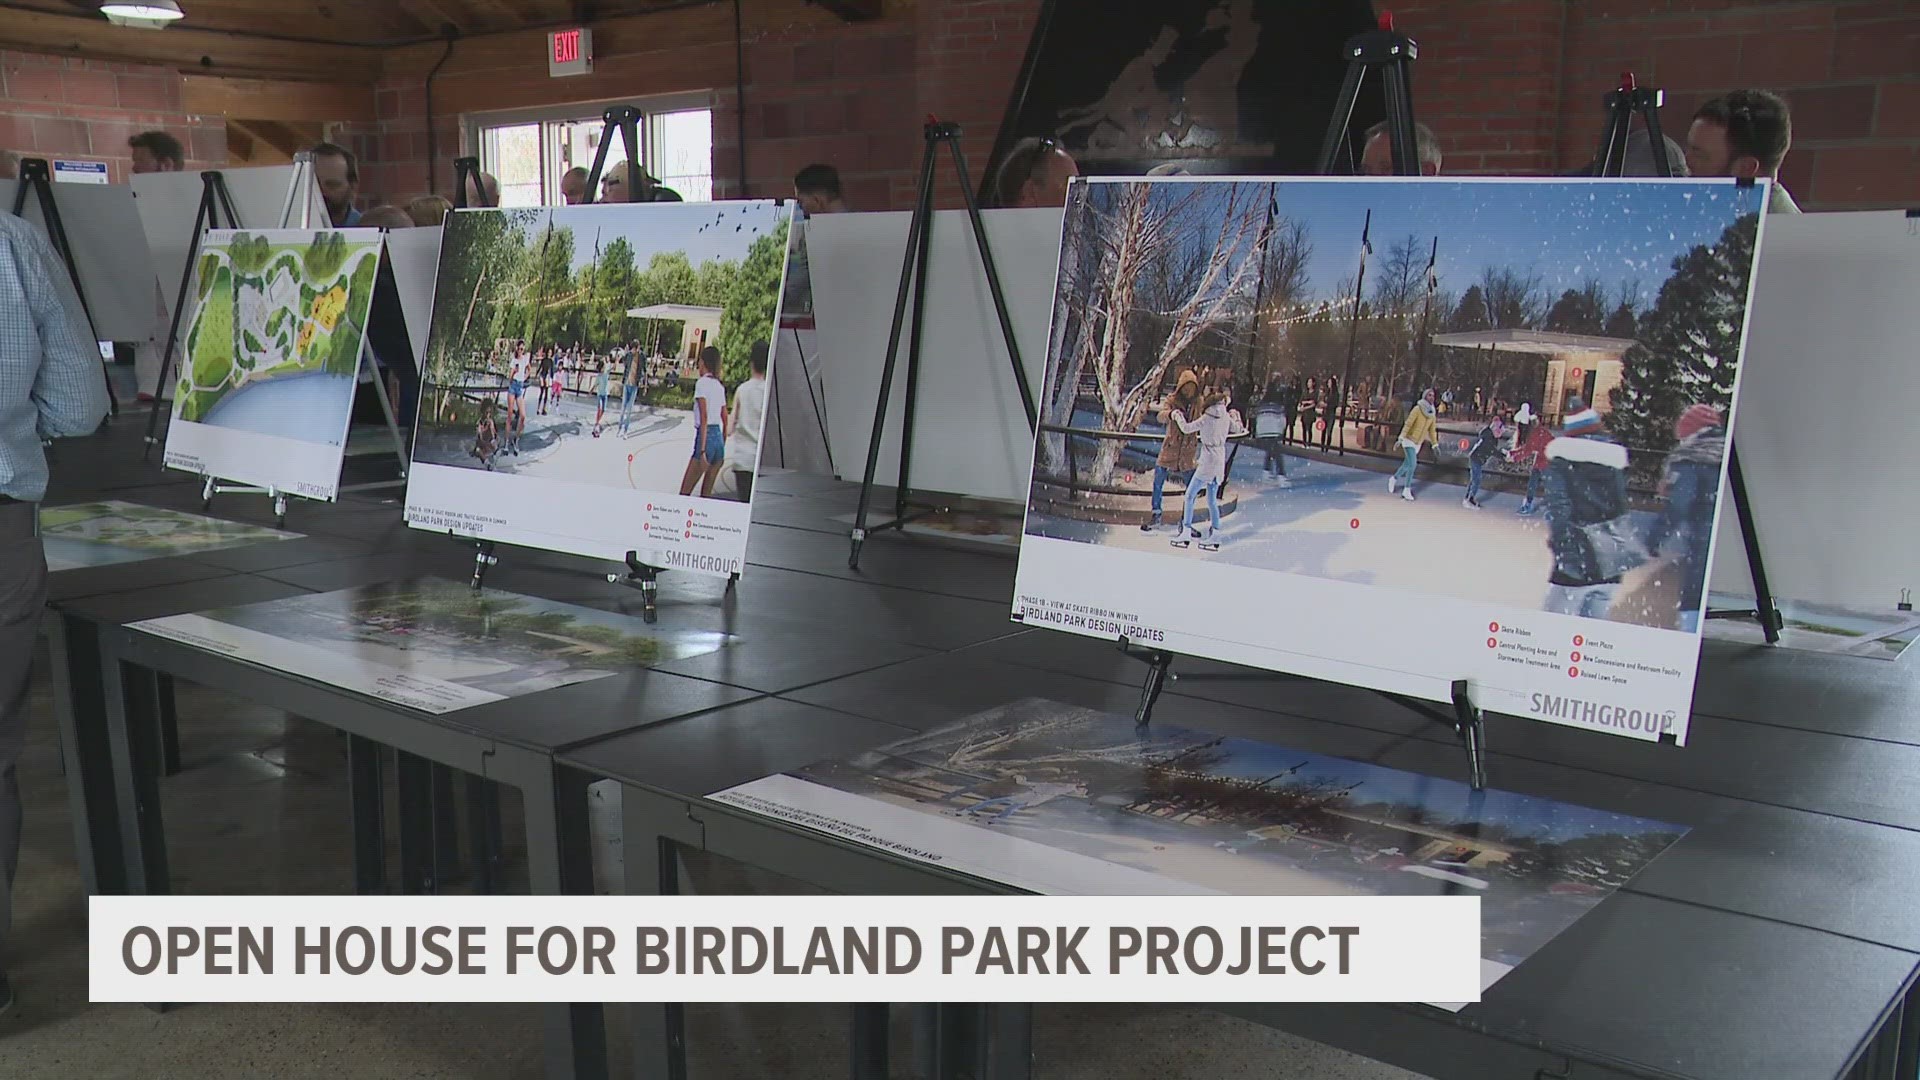 During the event Wednesday, attendees were able to see 3D renderings of new additions at Birdland.